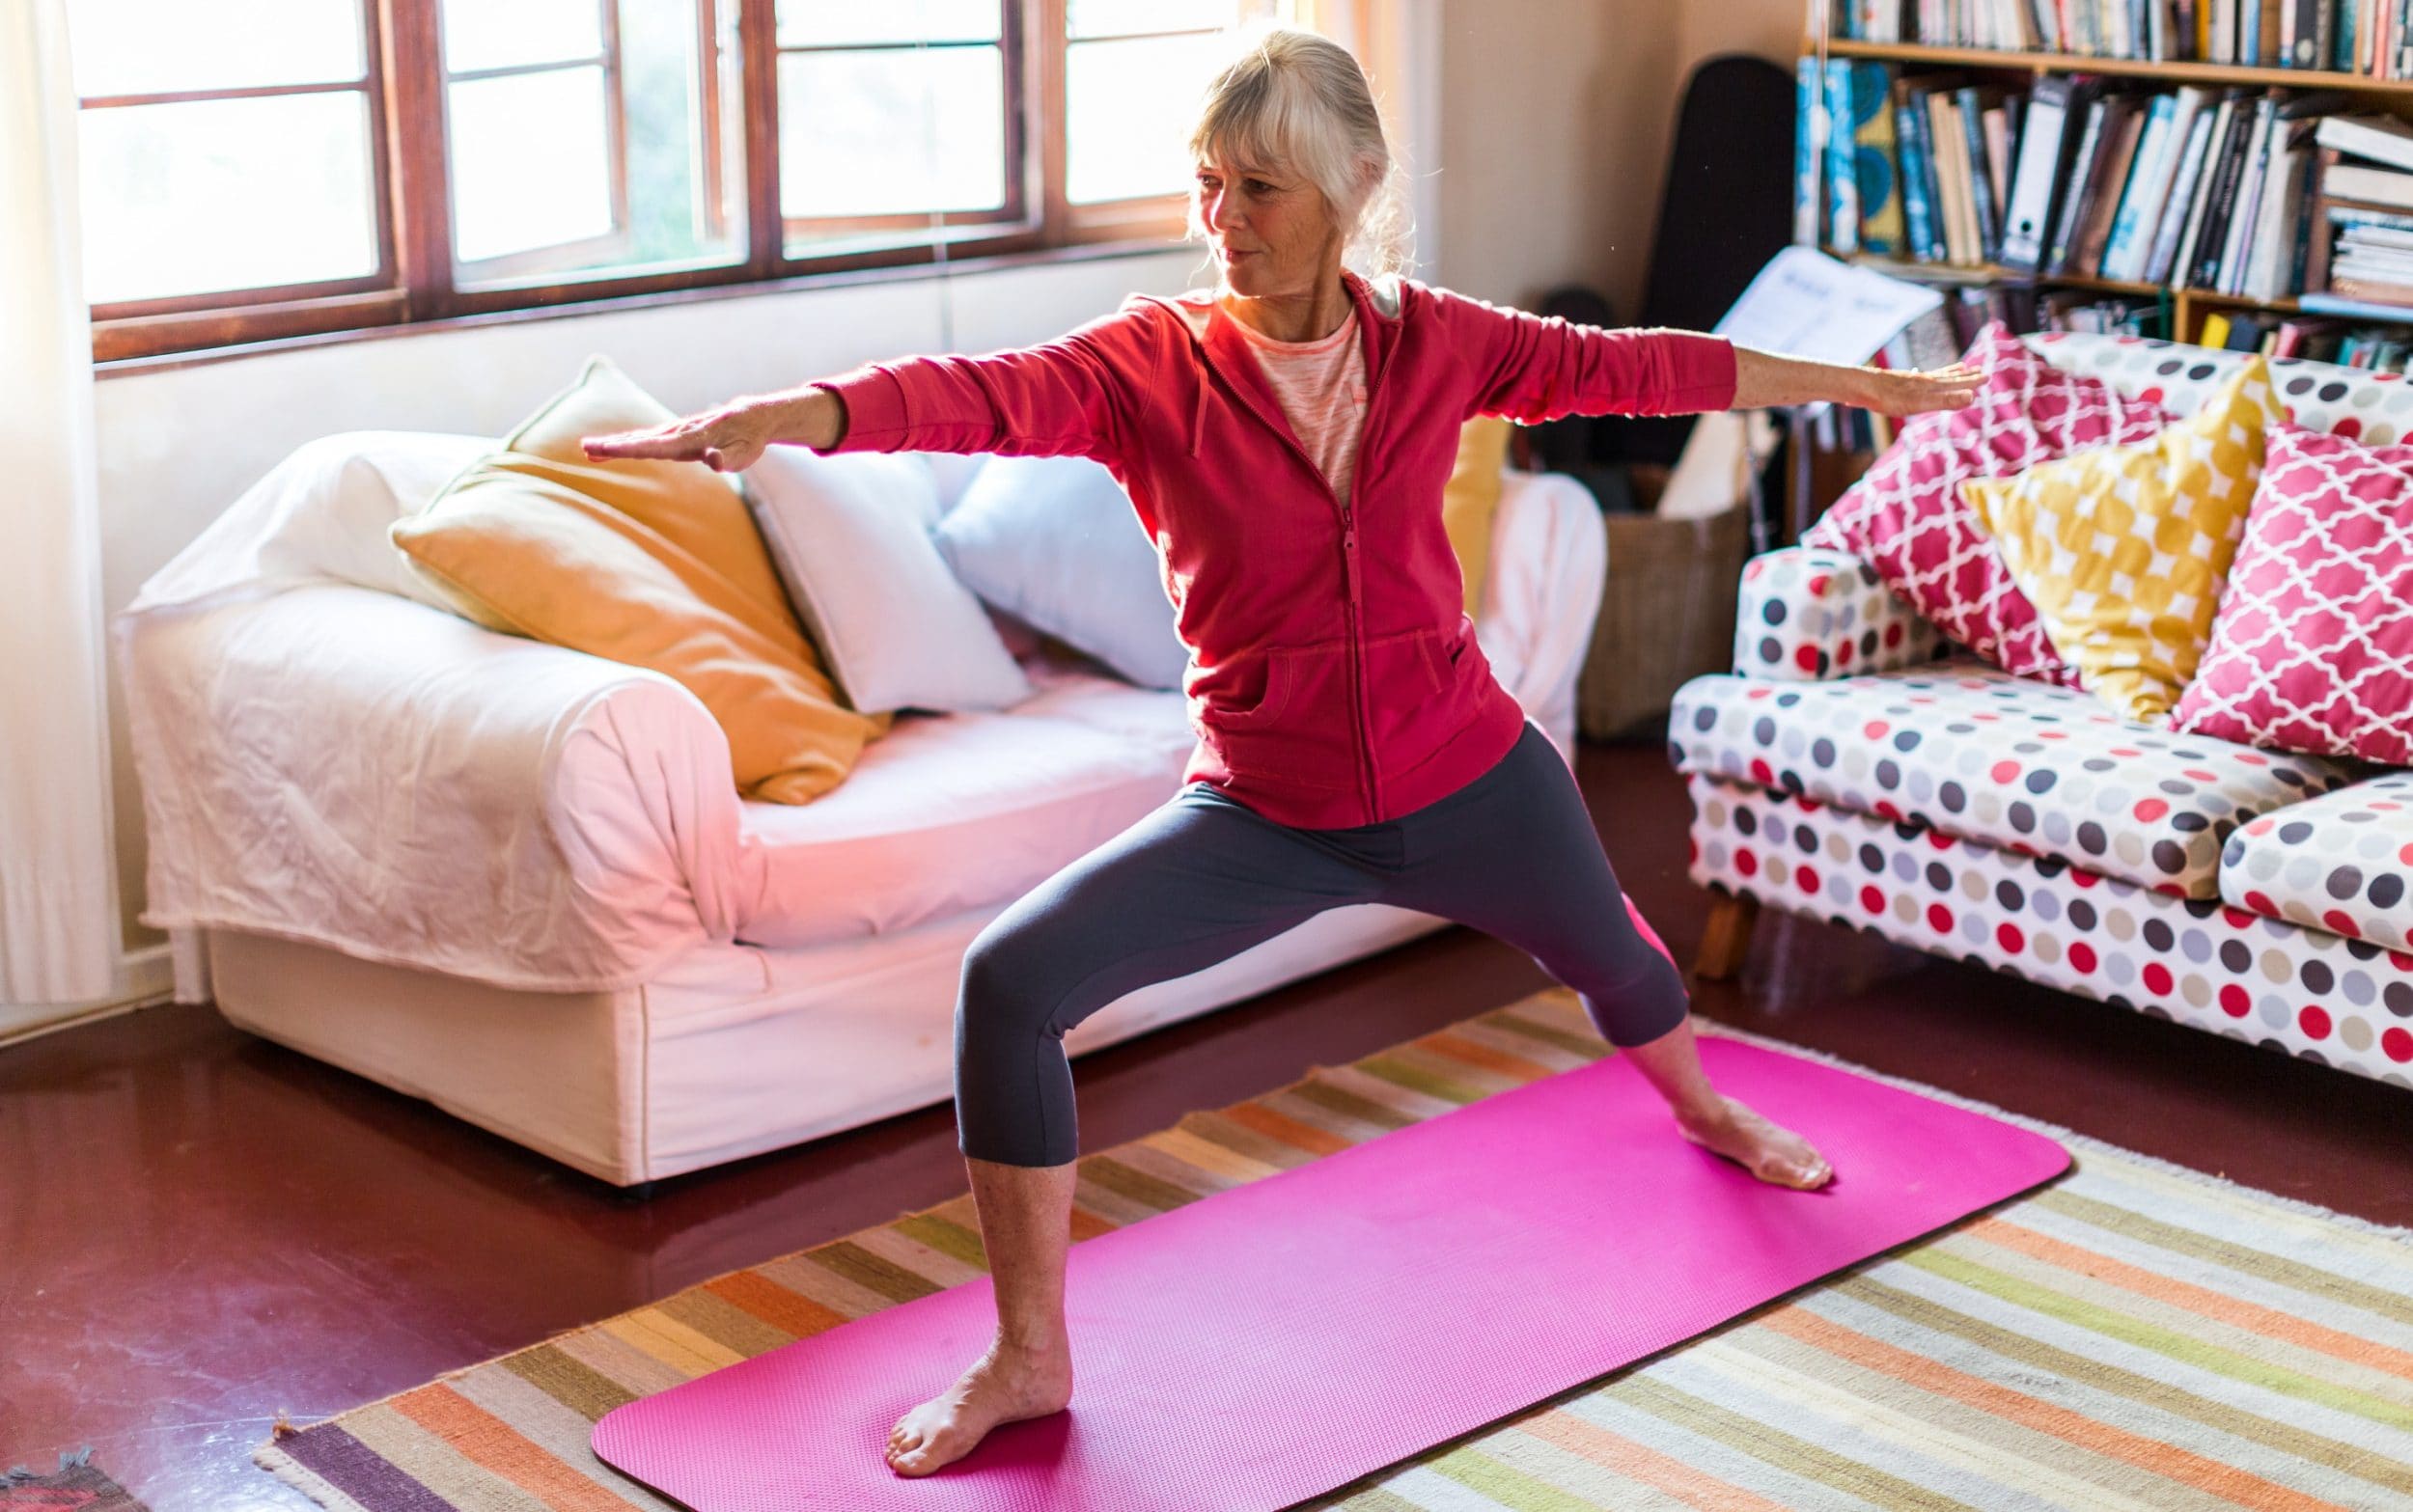 Gentle yoga sessions could improve cancer survival rates